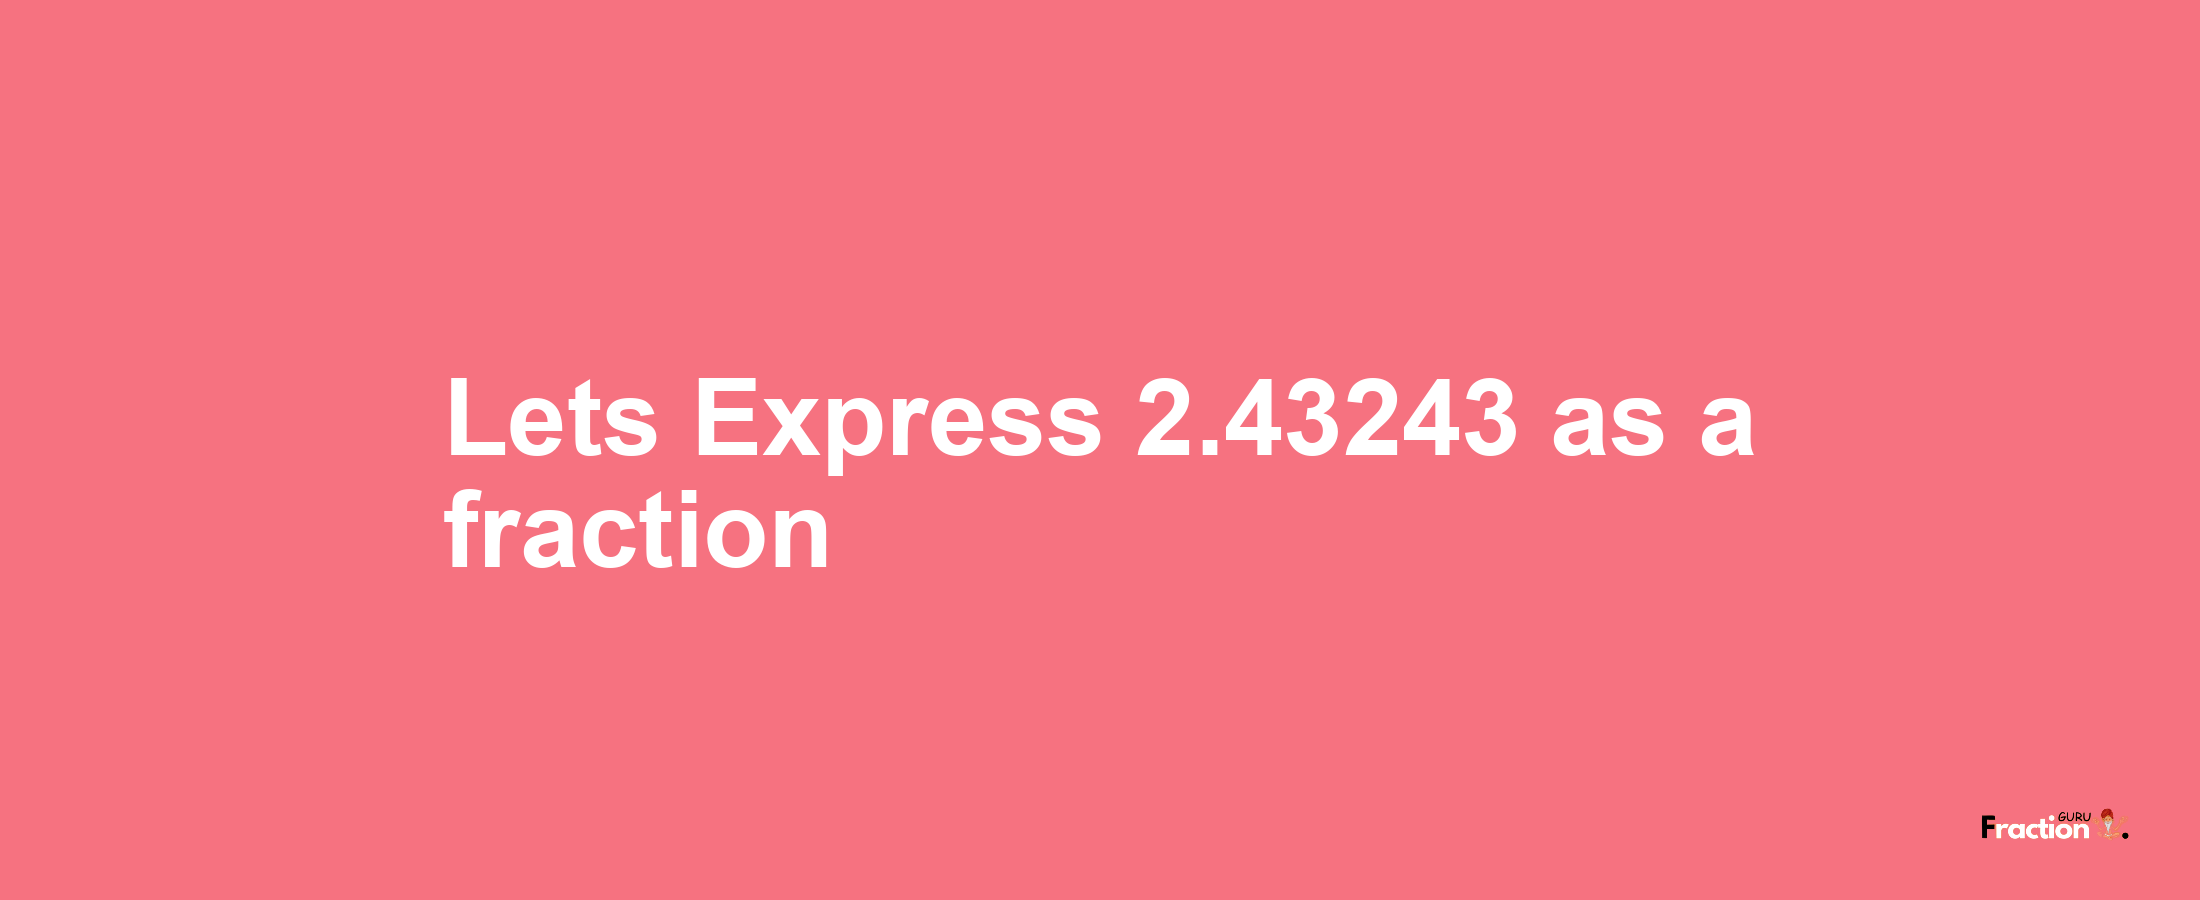 Lets Express 2.43243 as afraction